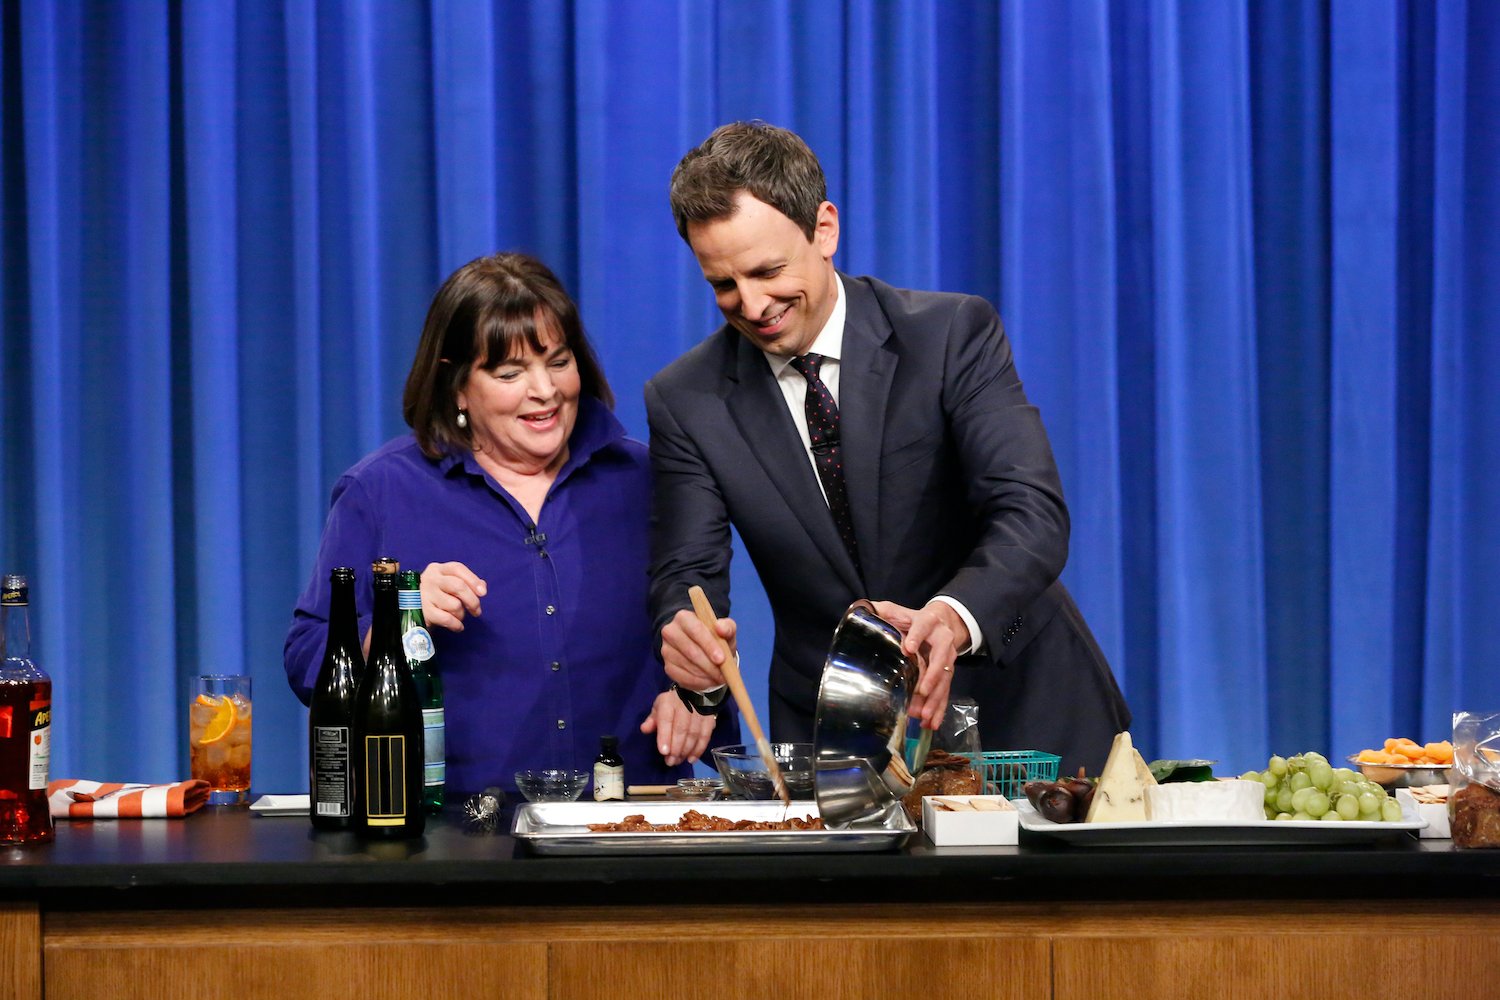 Ina Garten and Seth Meyers during a cooking segment Late Night with Seth Meyers